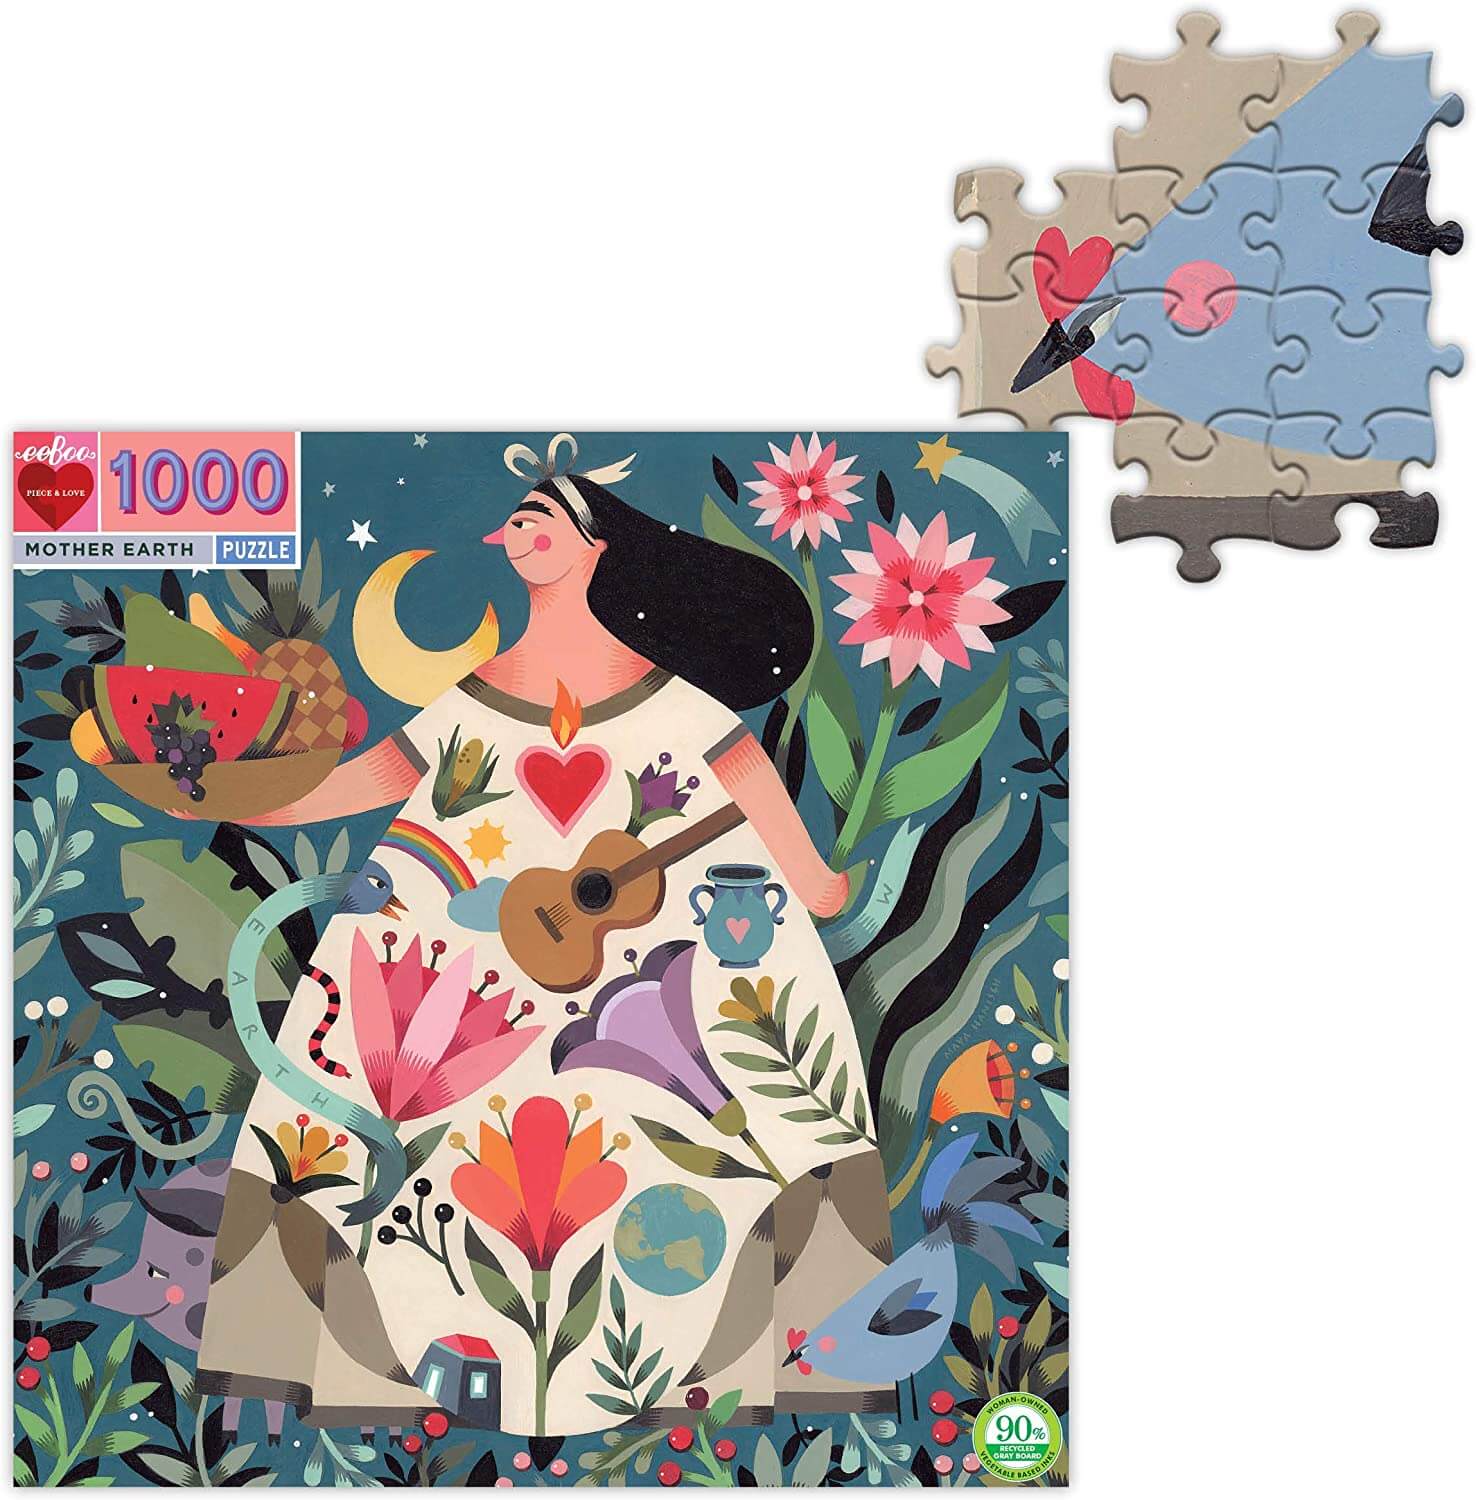 eeBoo - Piece and Love Mother Earth 1000 Piece Square Adult Jigsaw Puzzle Photo of box and completed section detail